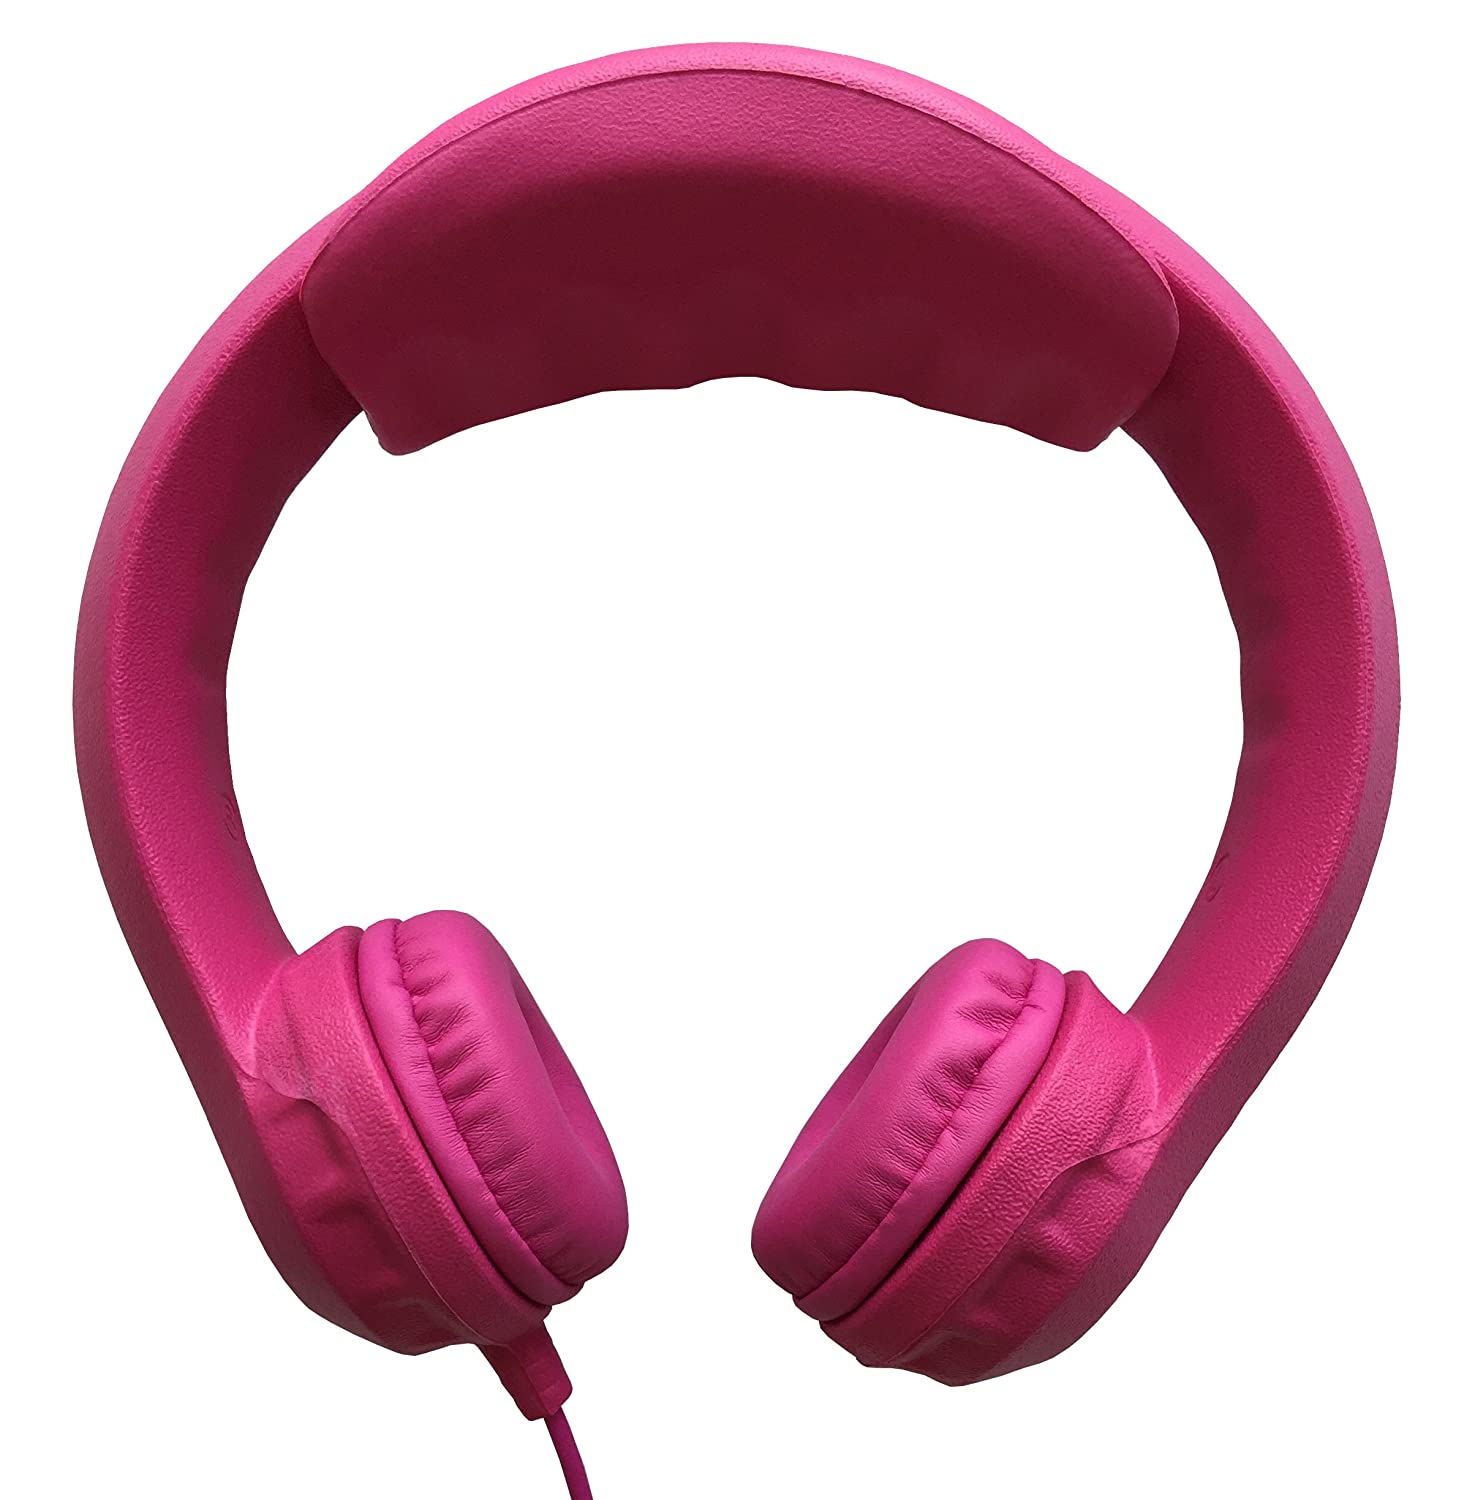 Kidrox Wired Kids Headphones, Volume Limited with Padded Cushions and Removable Size-Adjuster